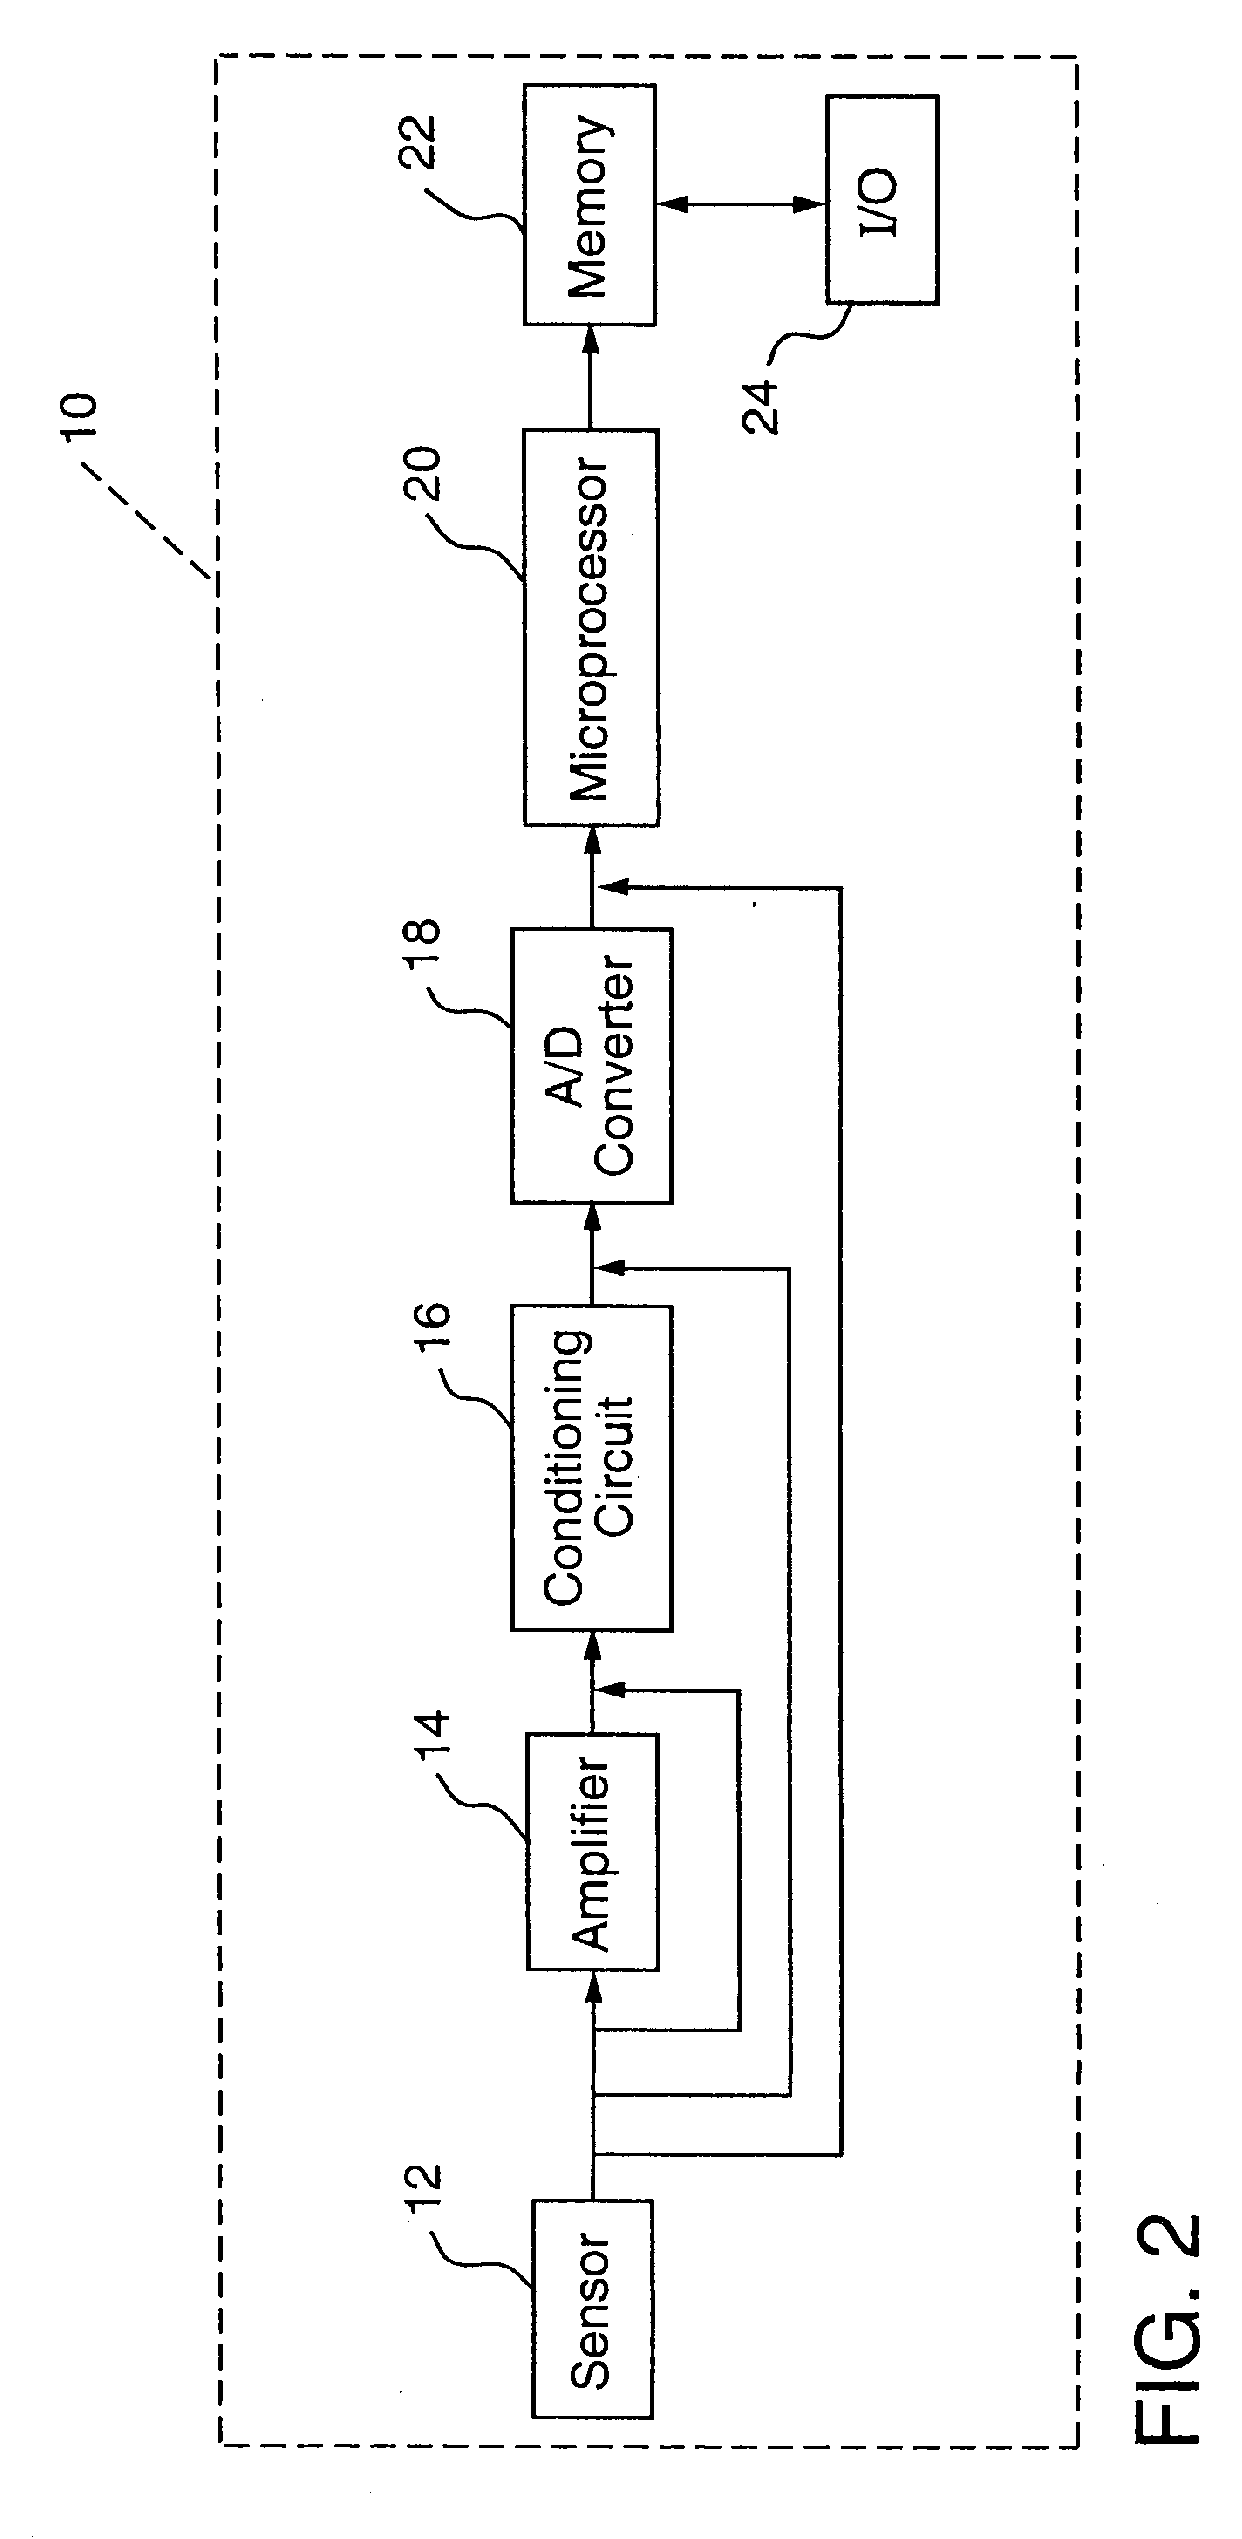 Method and apparatus for auto journaling of body states and providing derived physiological states utilizing physiological and/or contextual parameter